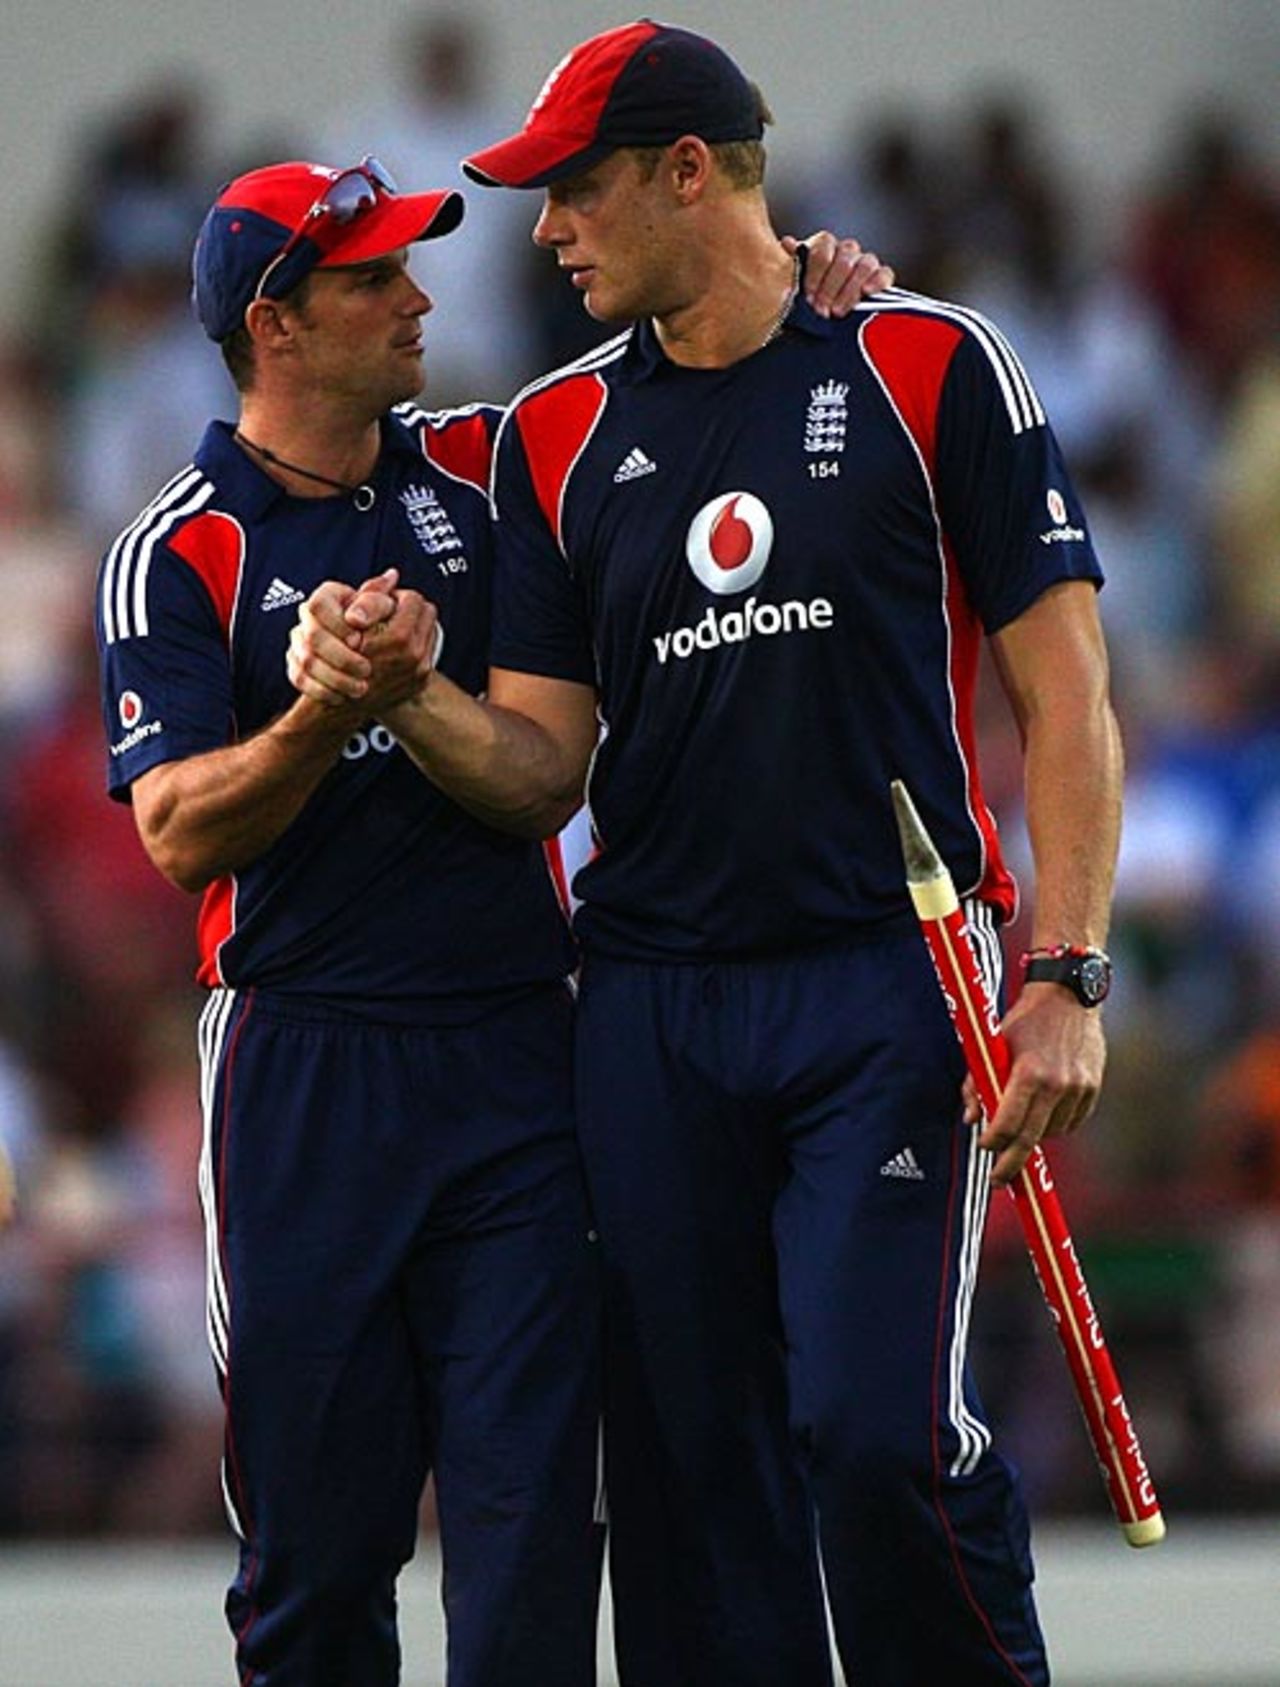 Andrew Strauss congratulates Andrew Flintoff, West Indies v England, 5th ODI, St Lucia, April 3, 2009